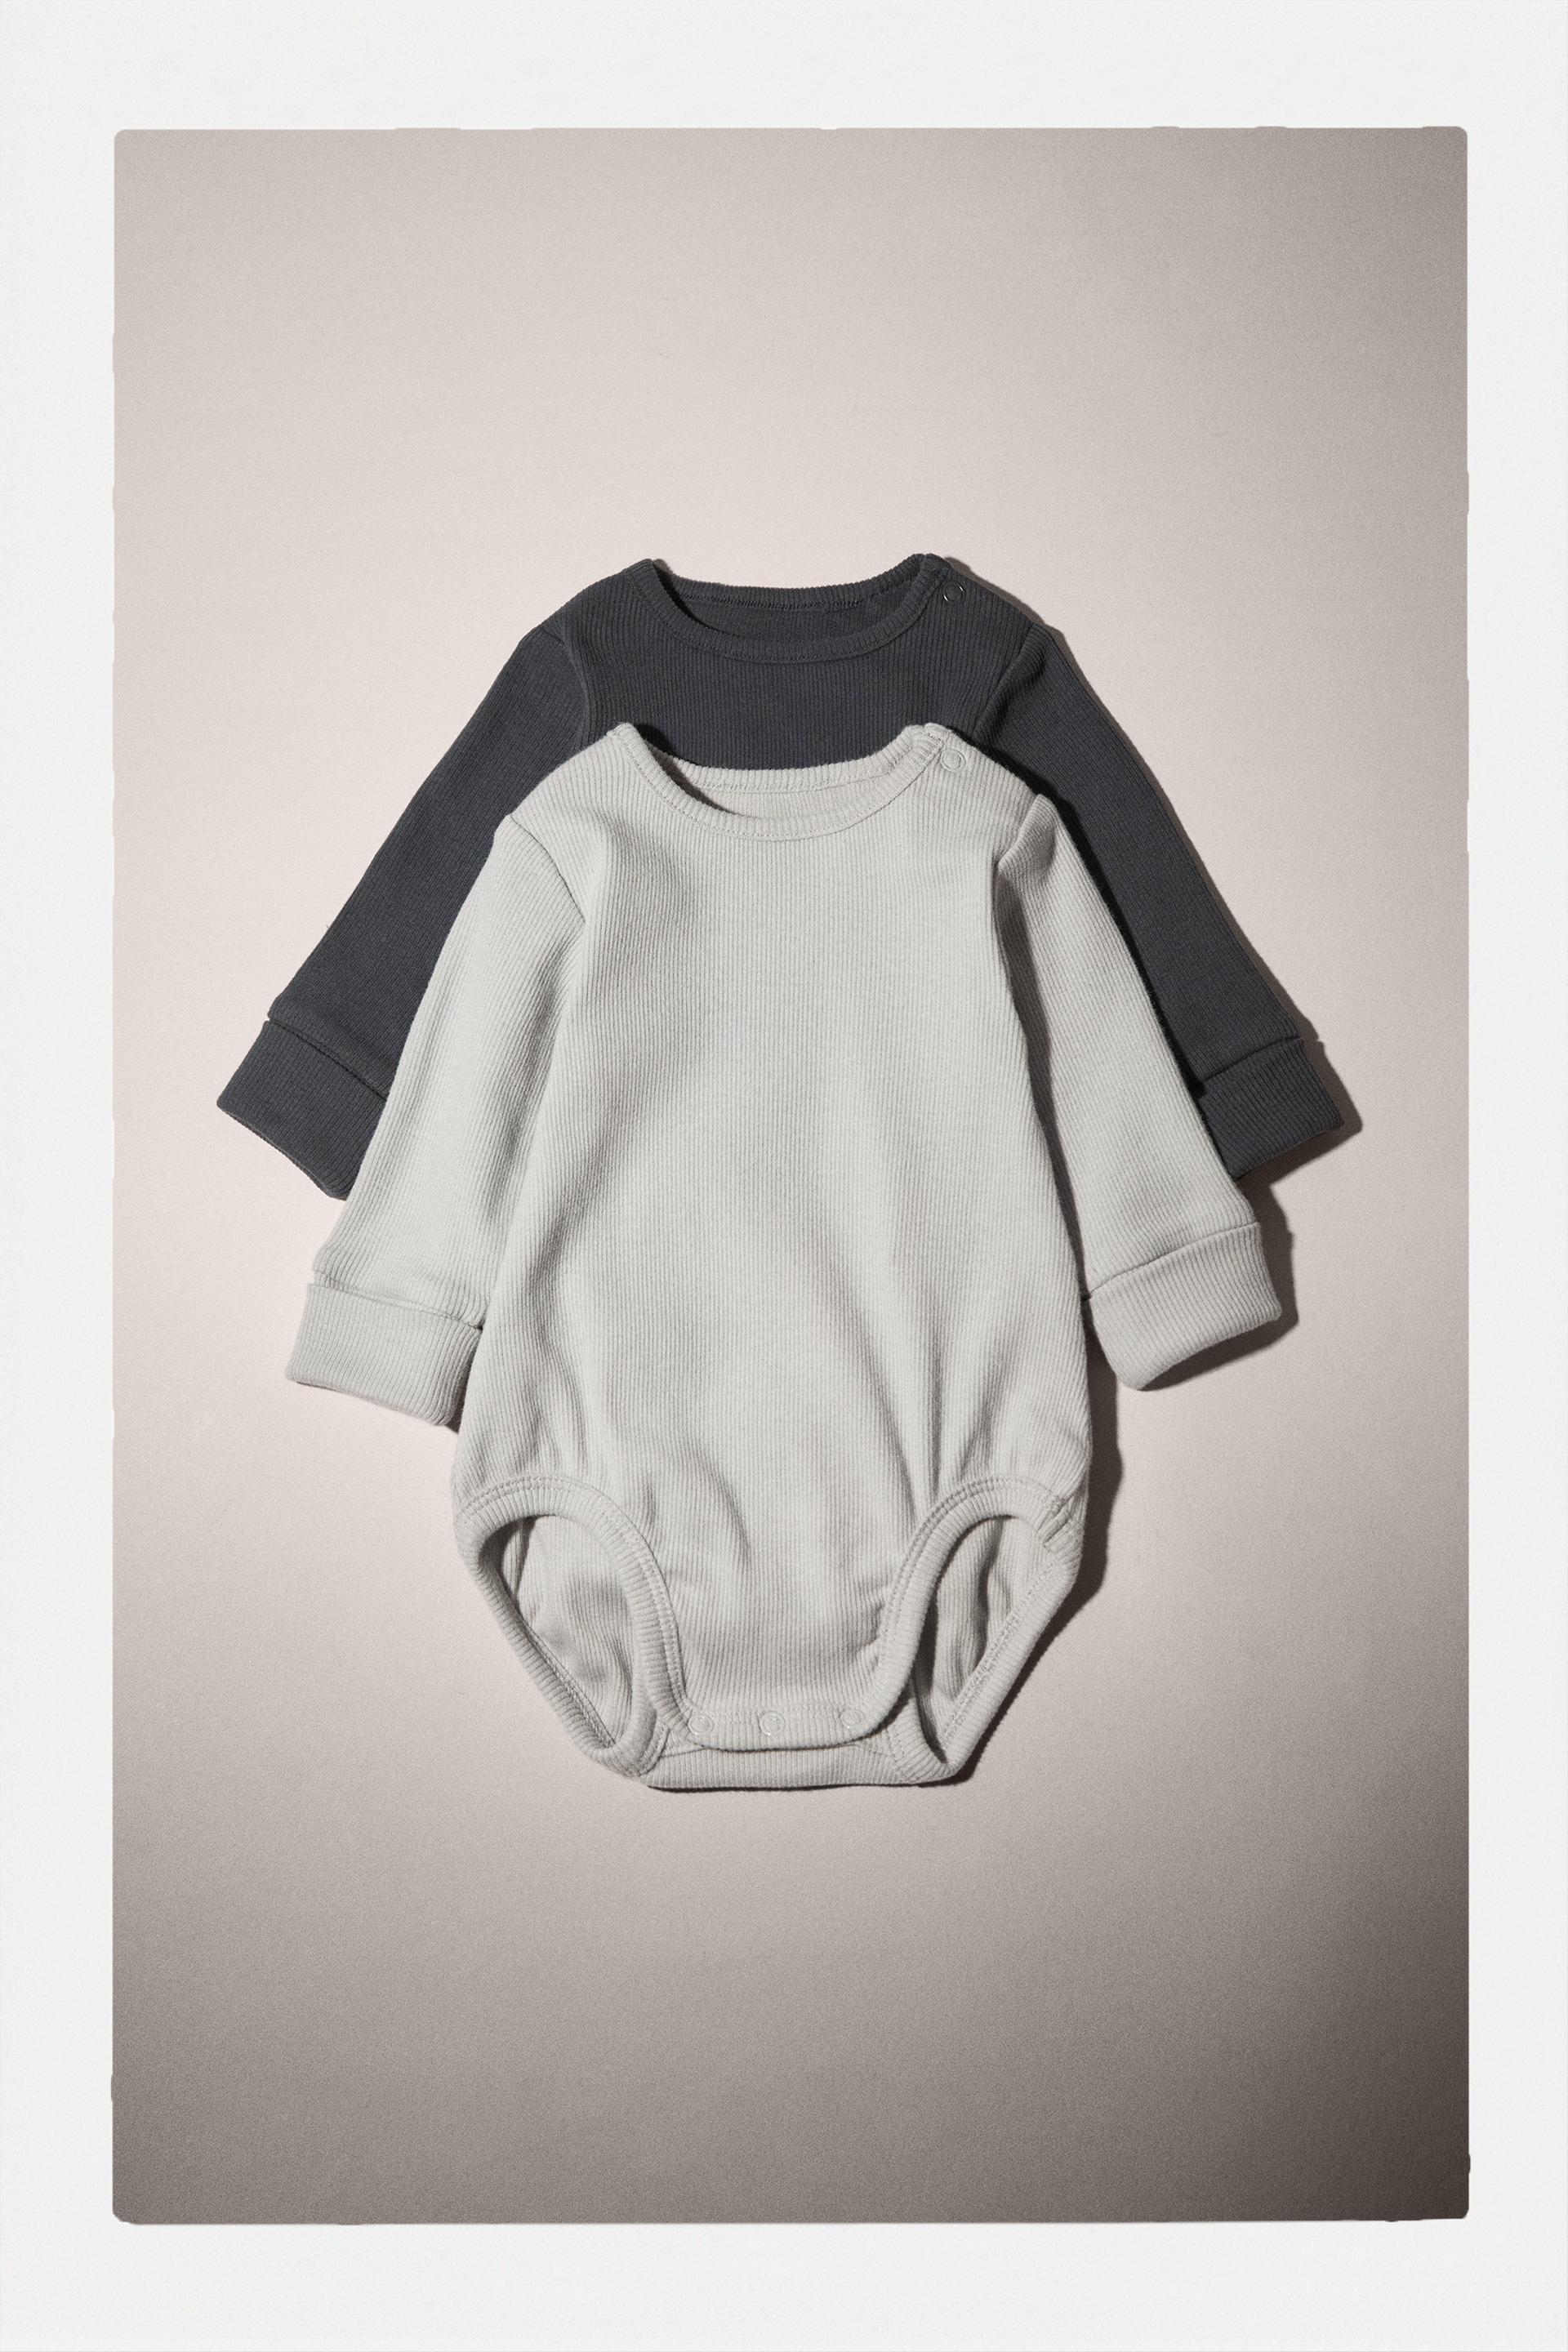  TATY Kids S is for Sabrina Long Sleeve Baby Infant One Piece  Bodysuit Newborn Heather Grey: Clothing, Shoes & Jewelry